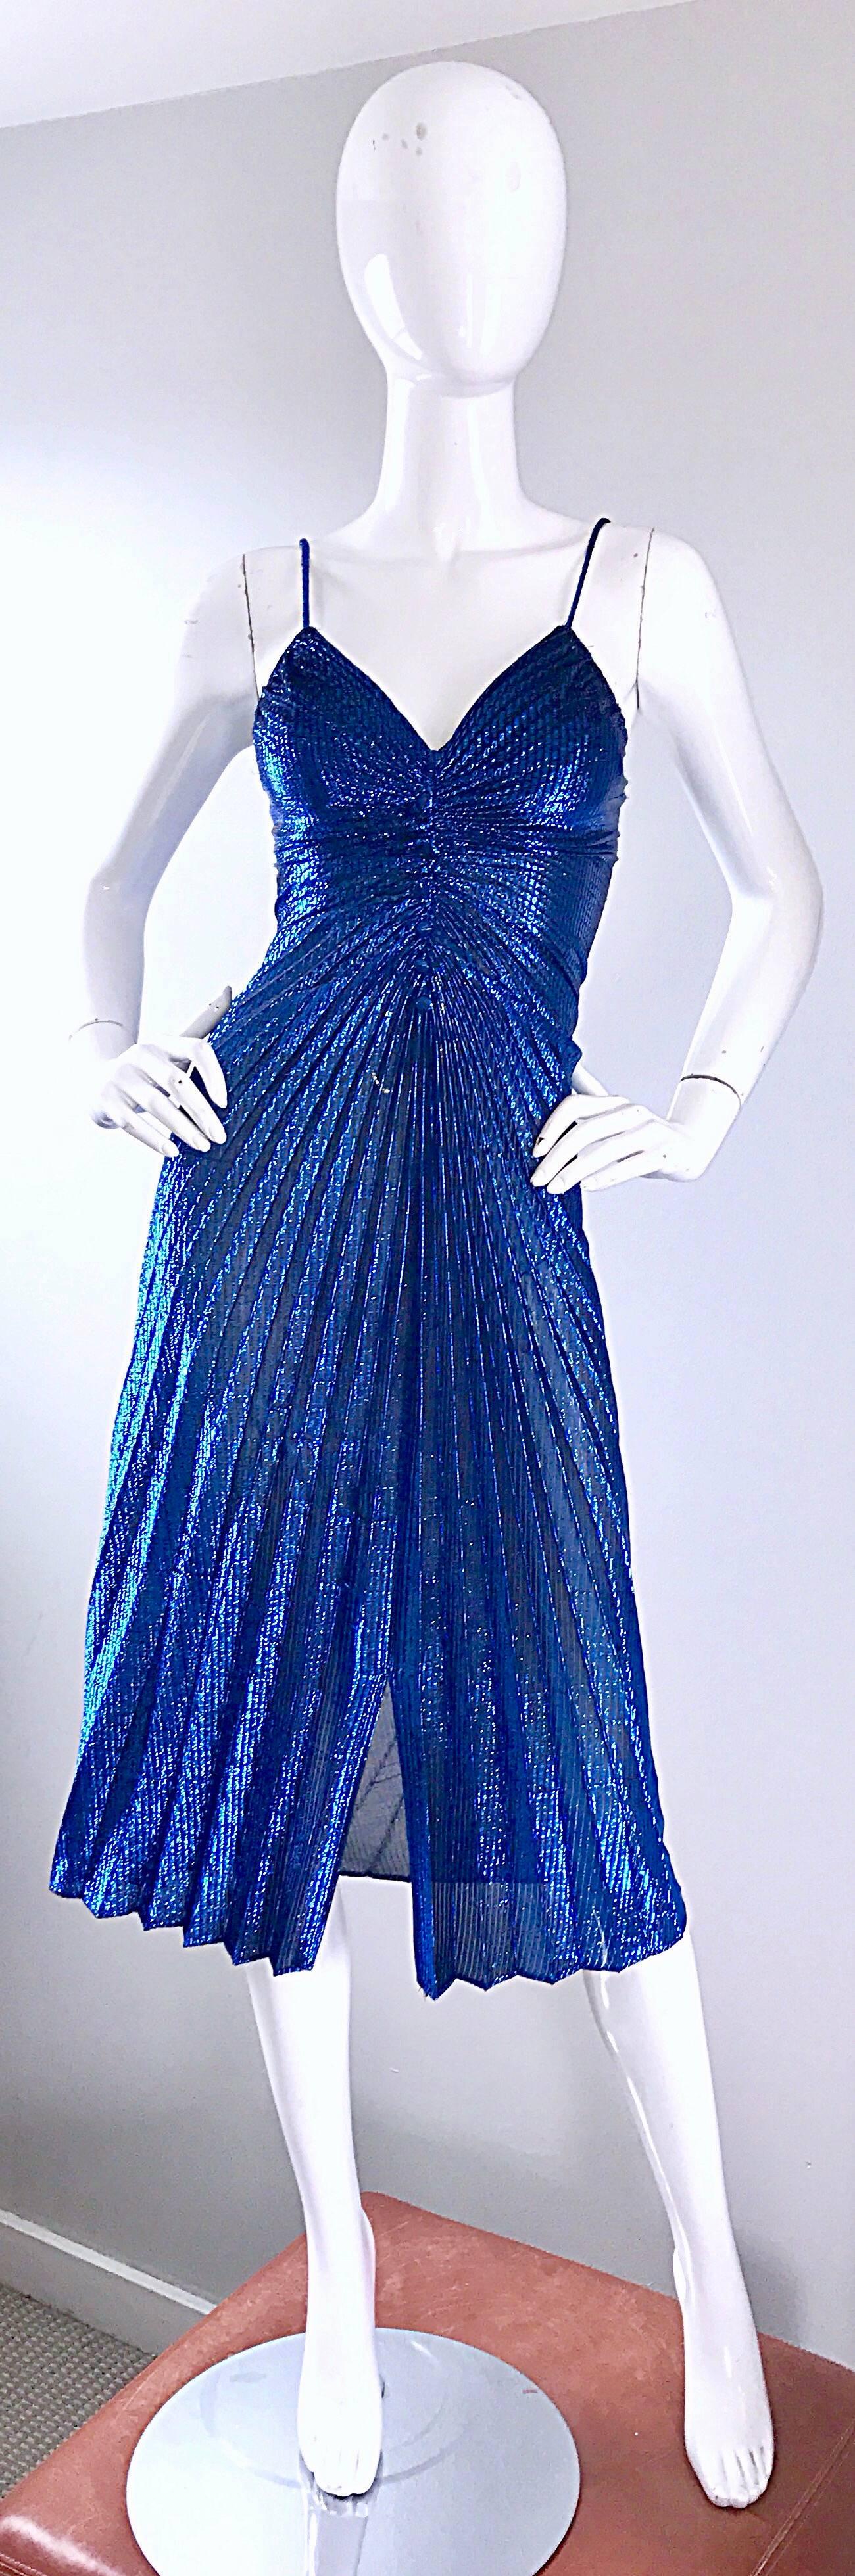 Amazing 1970s SAMIR vibrant blue metallic sexy sleeveless disco dress! Flattering pleating detail throughout. Fitted bodice with mock buttons up the front. Hidden zipper put he back. Looks amazing on, and perfect for any day or evening event. Great